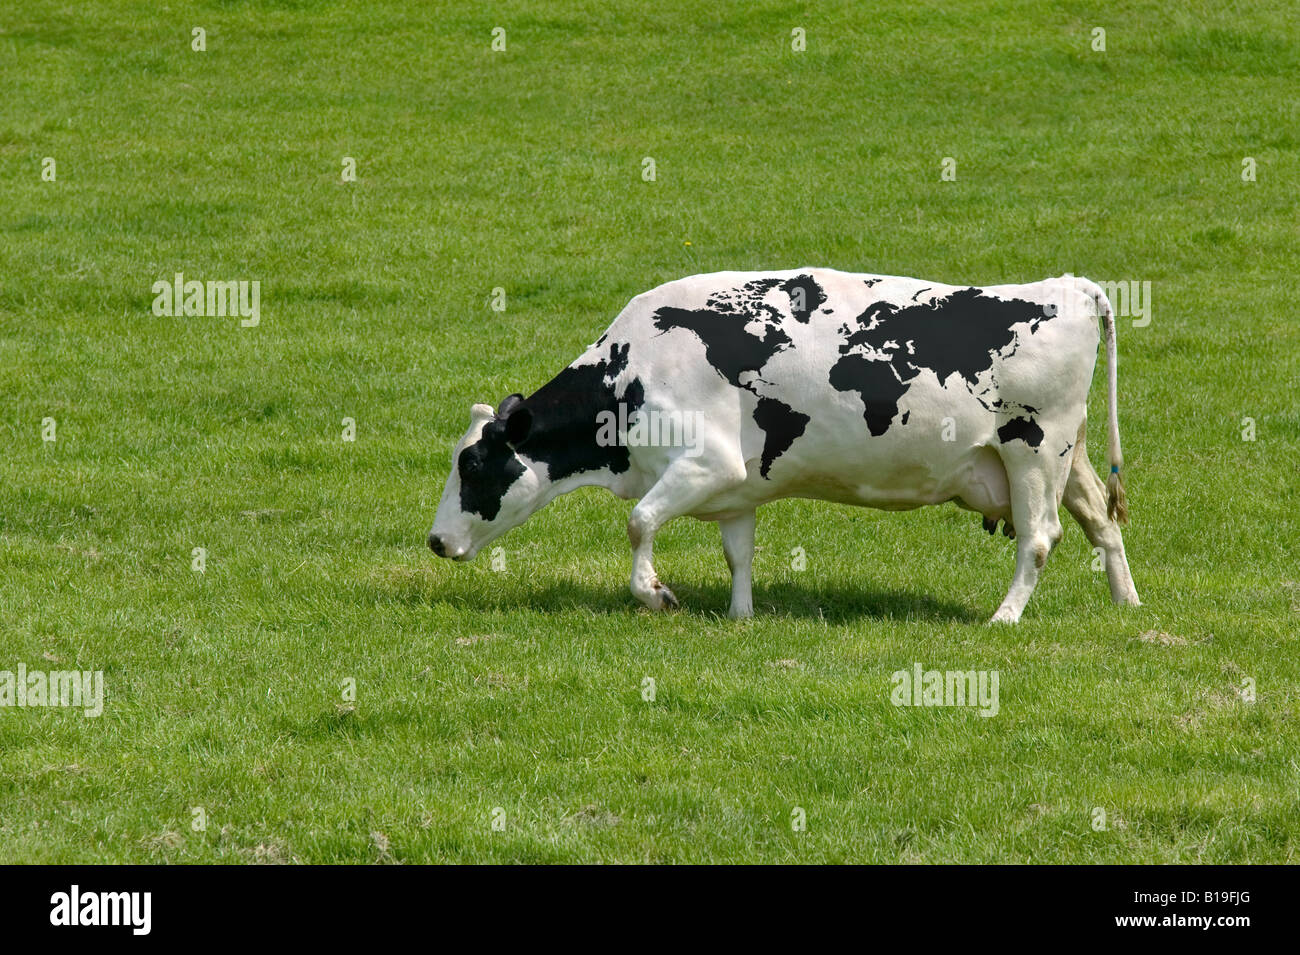 A dairy cow with the map of the world markings Stock Photo